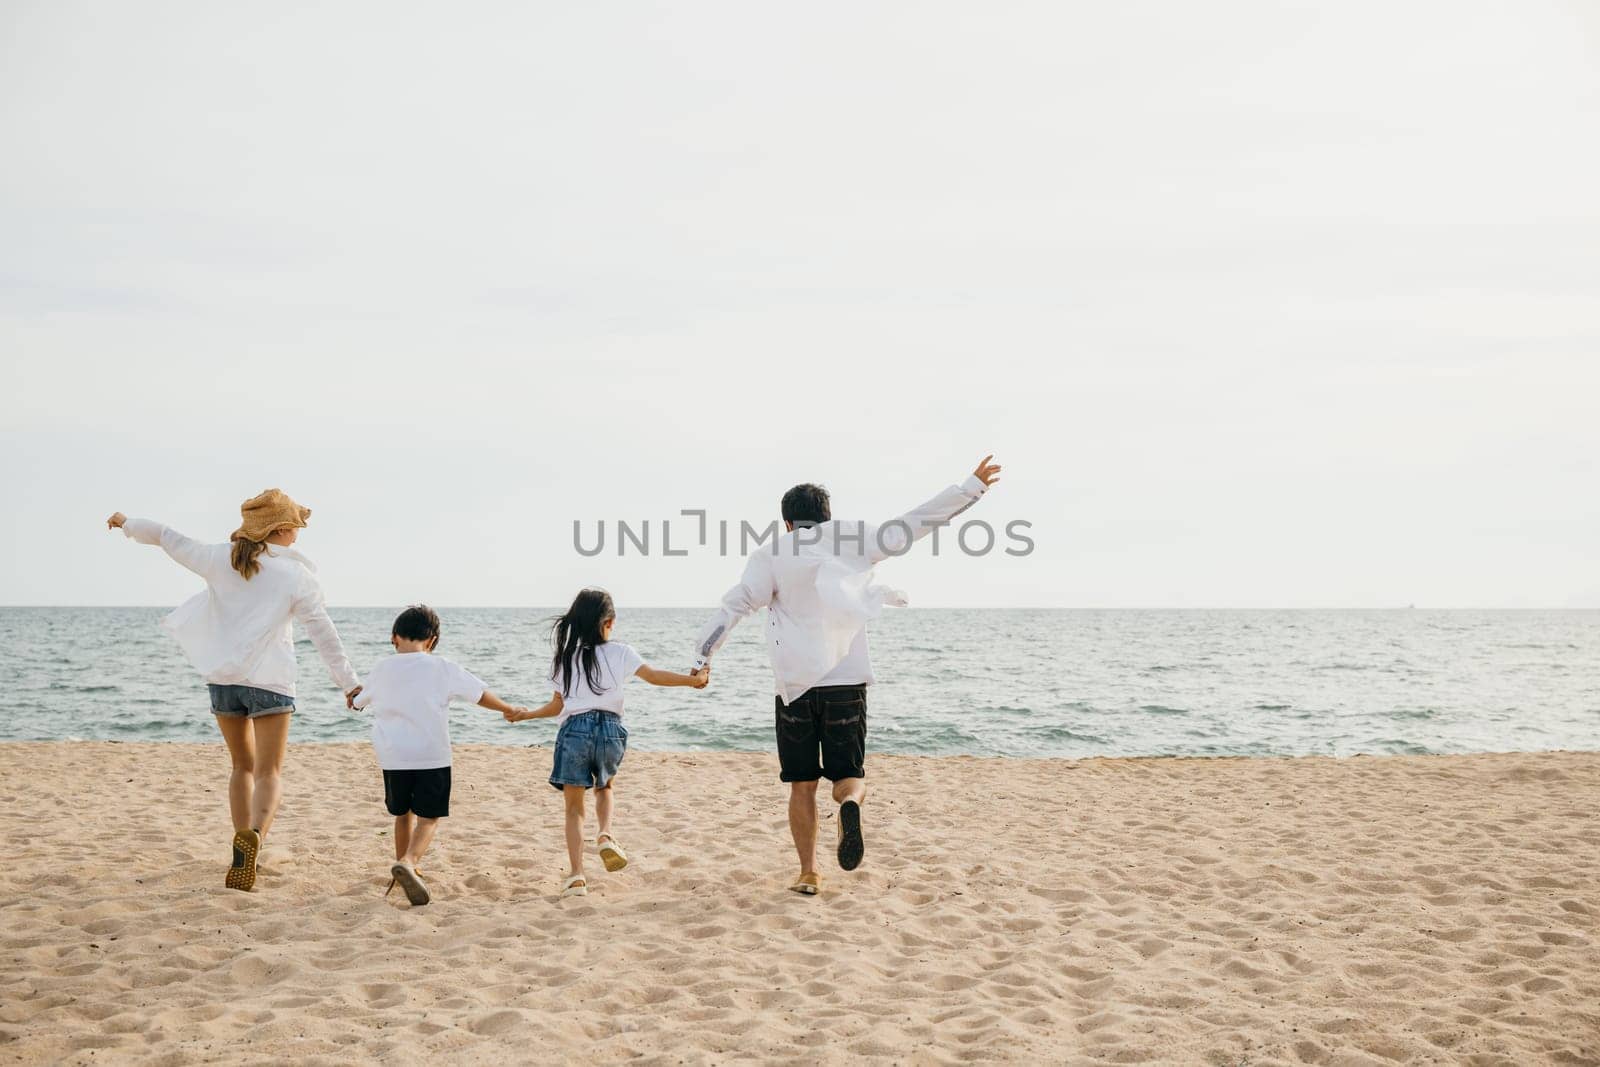 A heartening family scene on the beach parents holding hands running and jumping with their children in holiday laughter. Illustrating the happiness and togetherness of a carefree beach vacation.